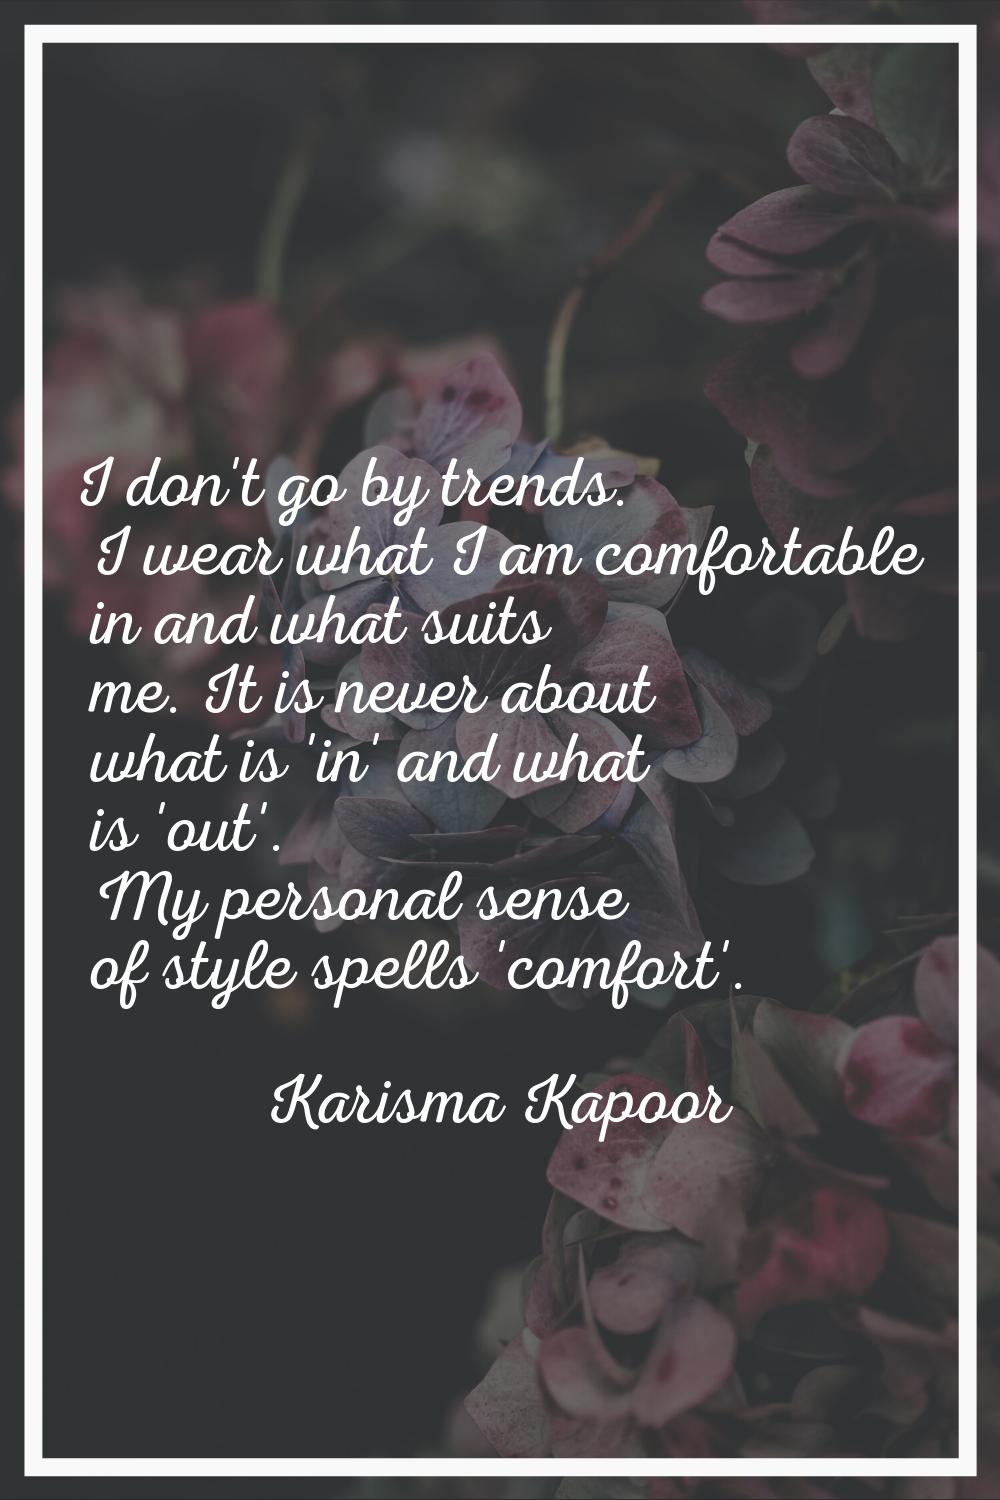 I don't go by trends. I wear what I am comfortable in and what suits me. It is never about what is 